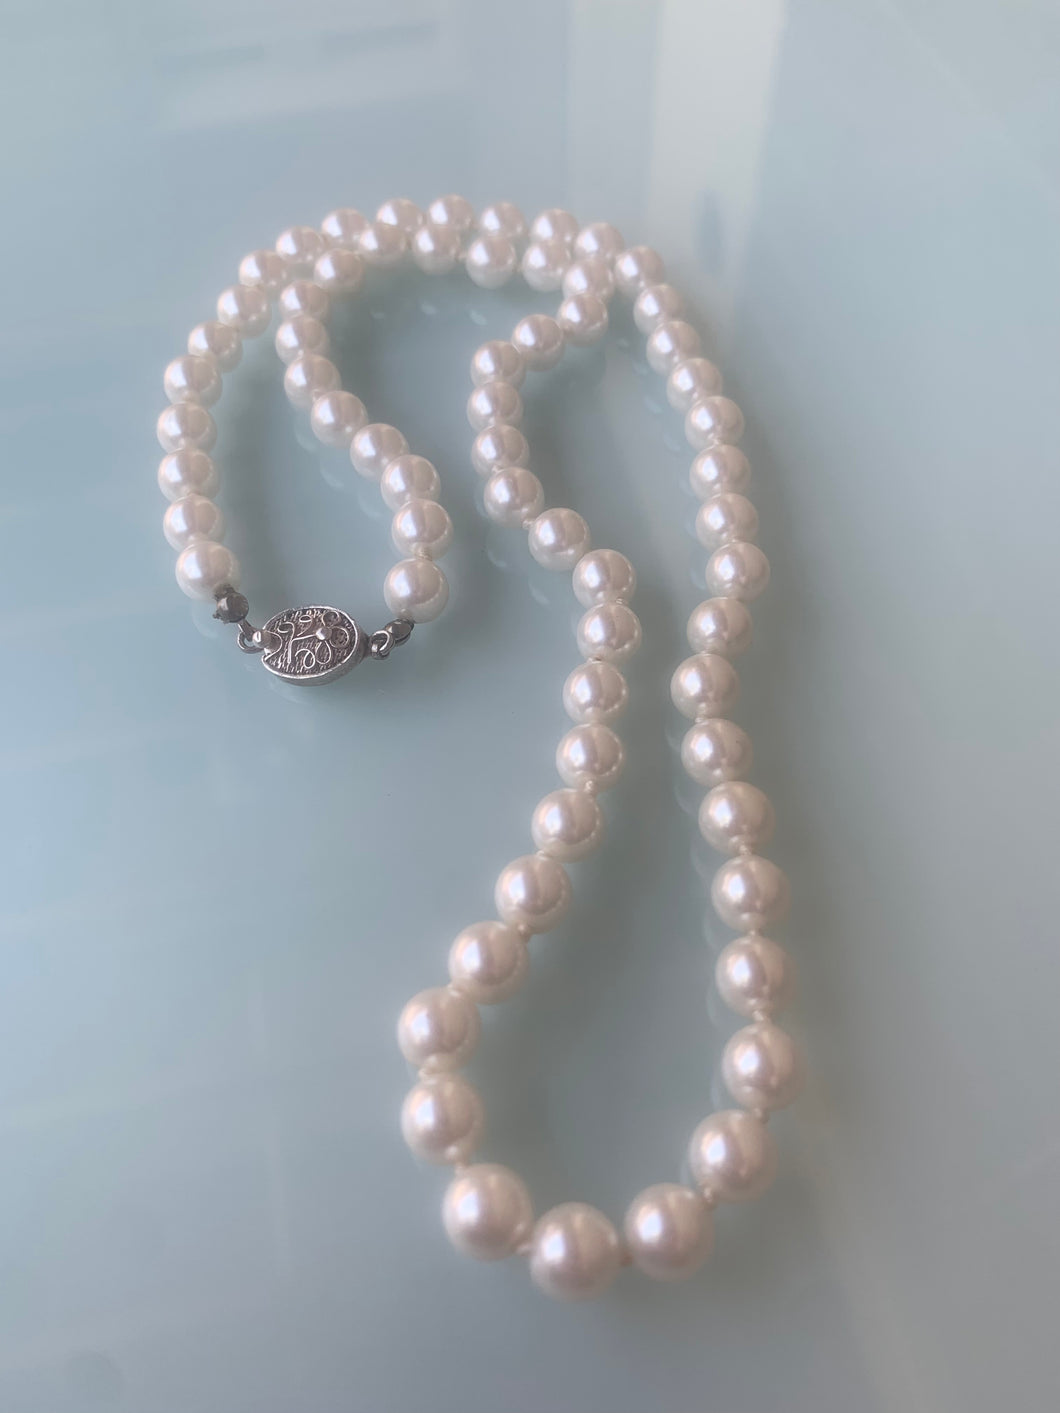 23 inch strand of Pearls